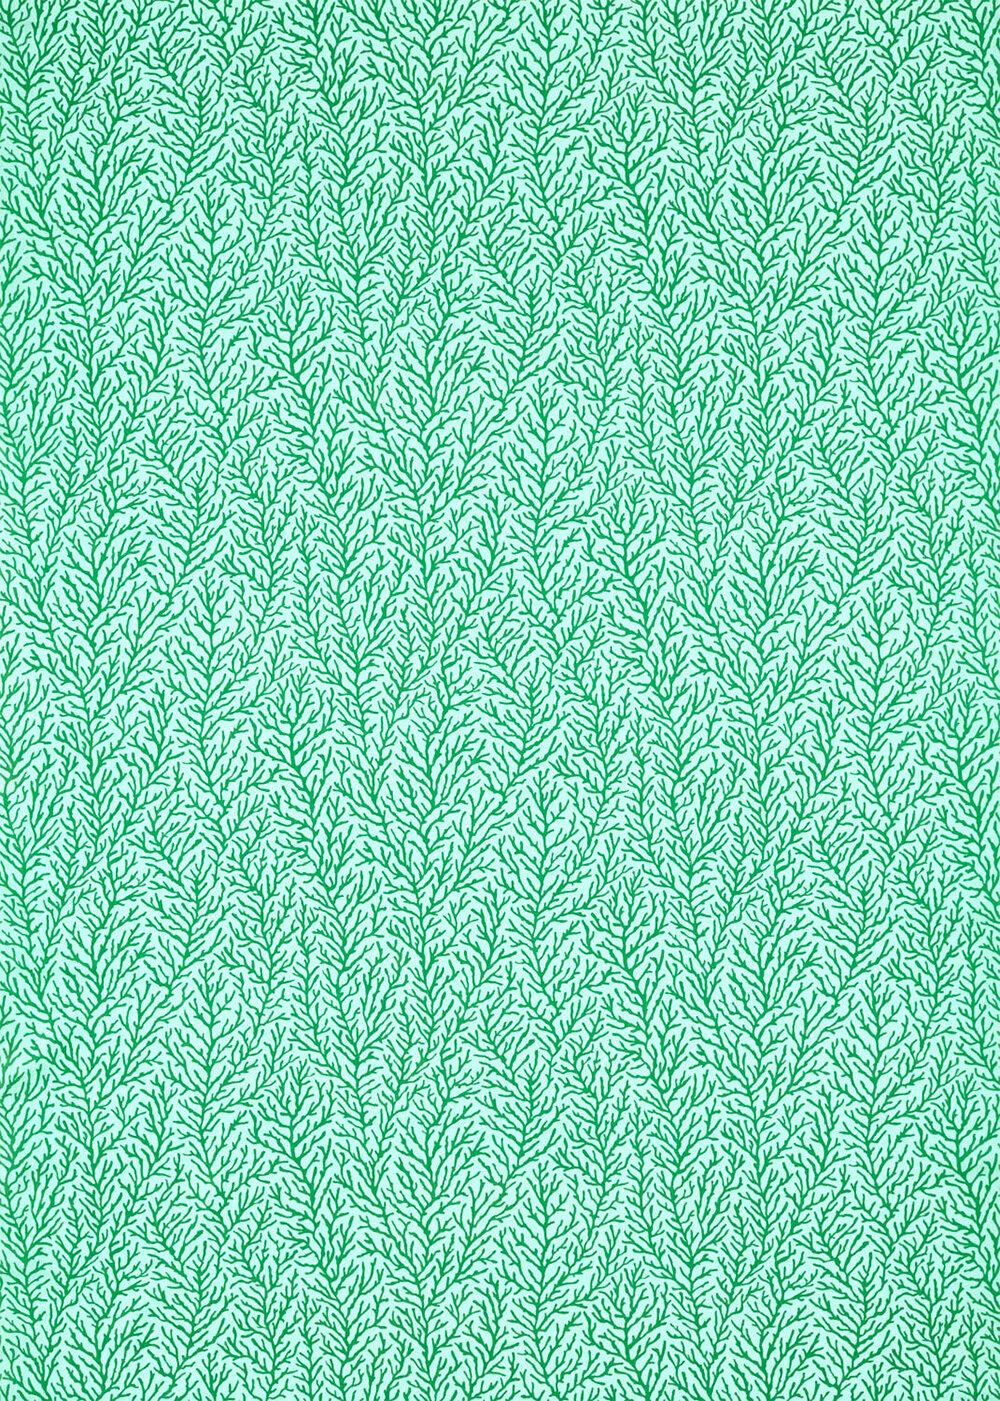 Atoll  Fabric - Seaglass/ Emerald - by Harlequin